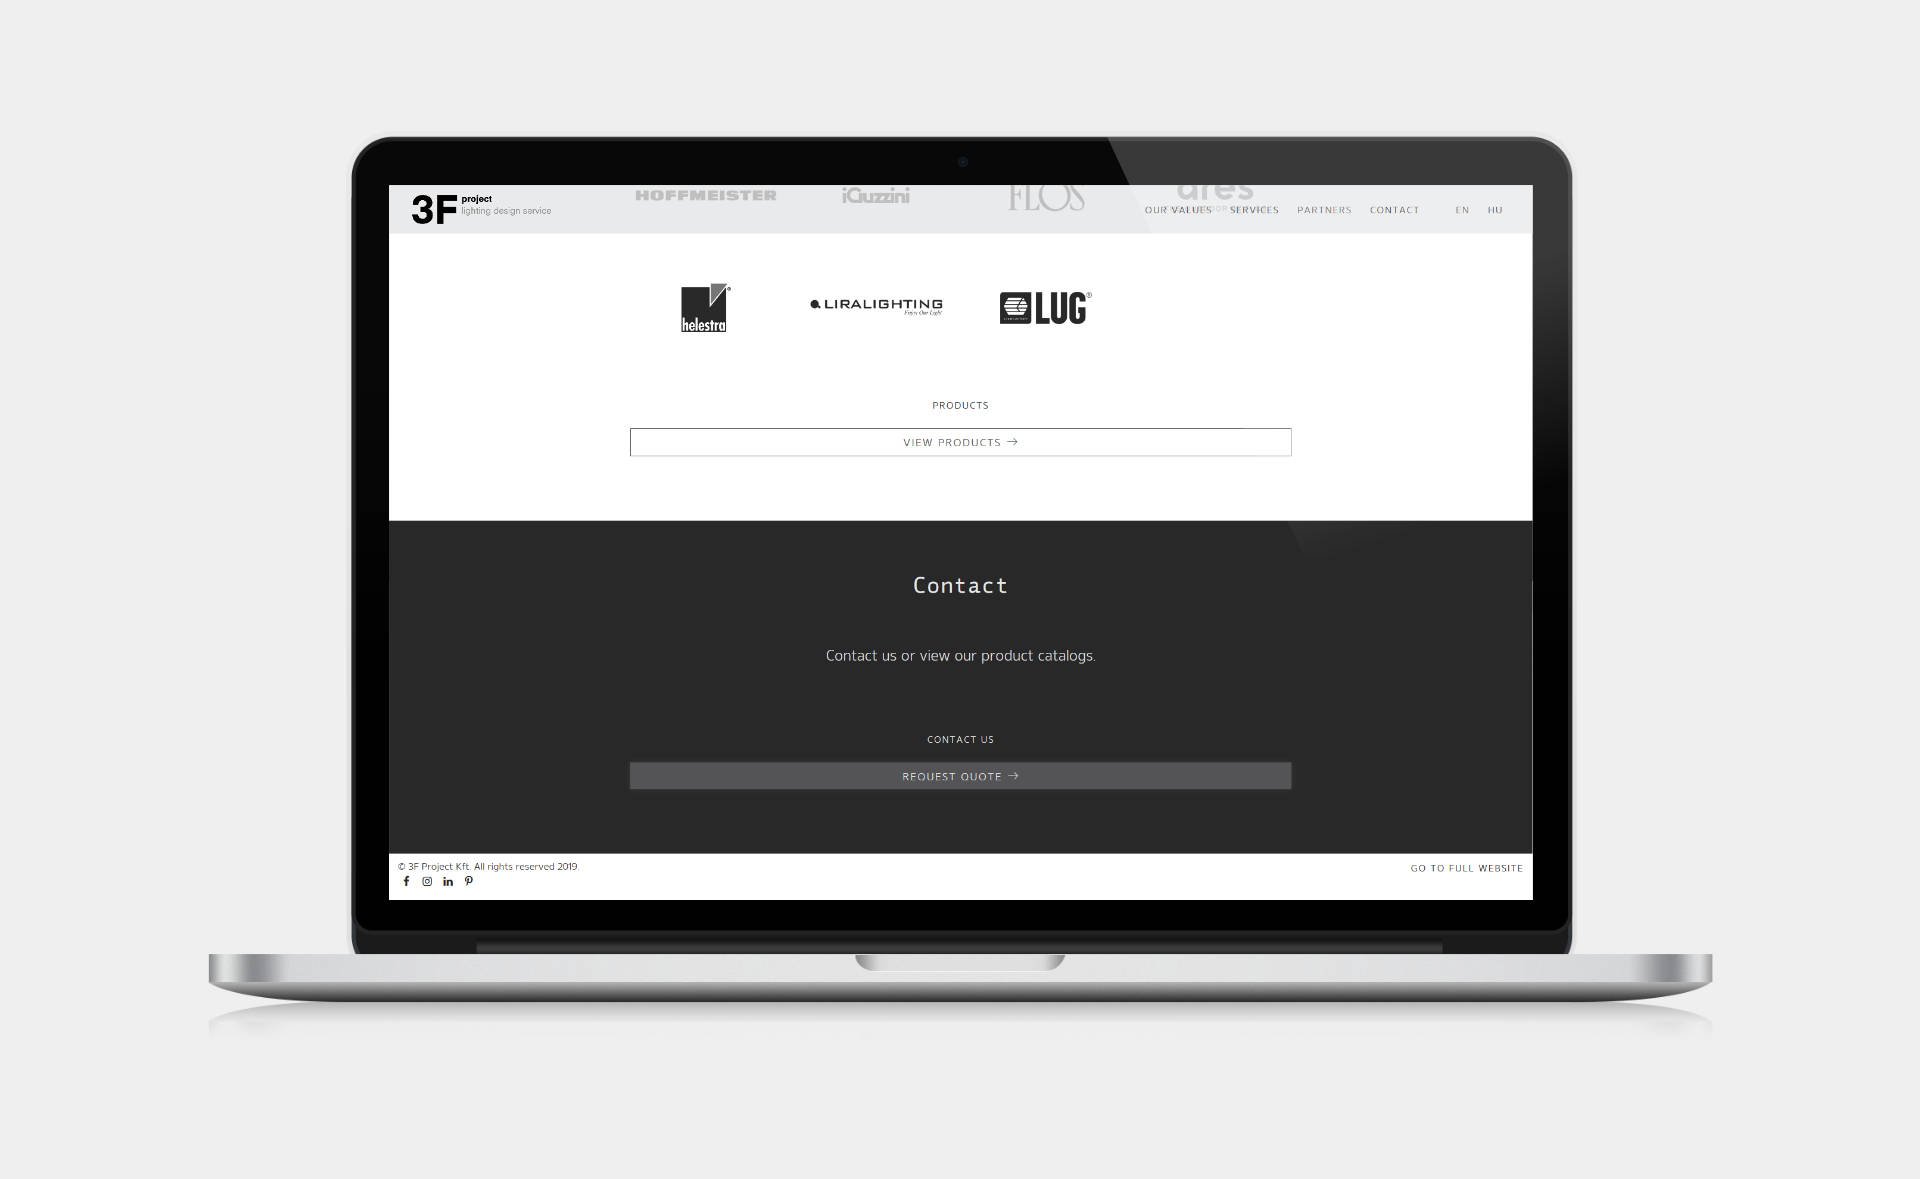 Landing page design, and bespoke WordPress website building for 3F Project's retail lighting service home page on desktop